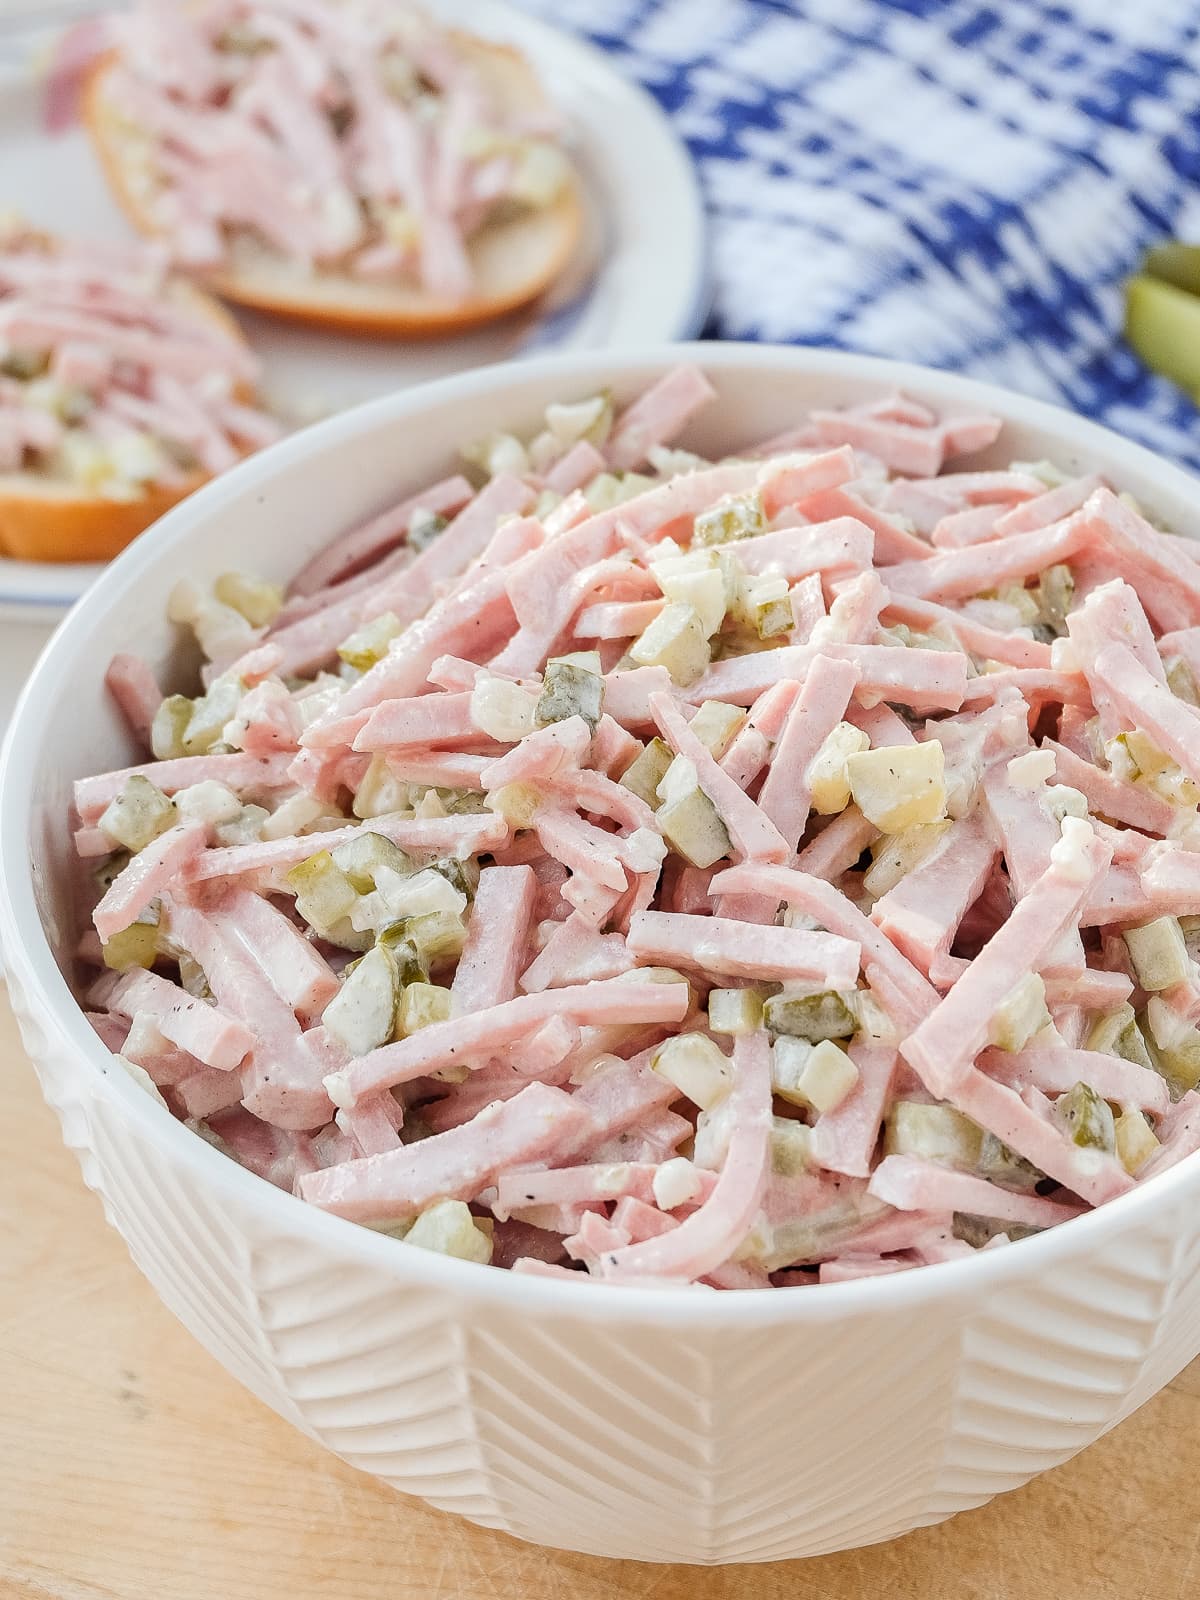 strips of sausage with pickles and onion in creamy dressing in white bowl